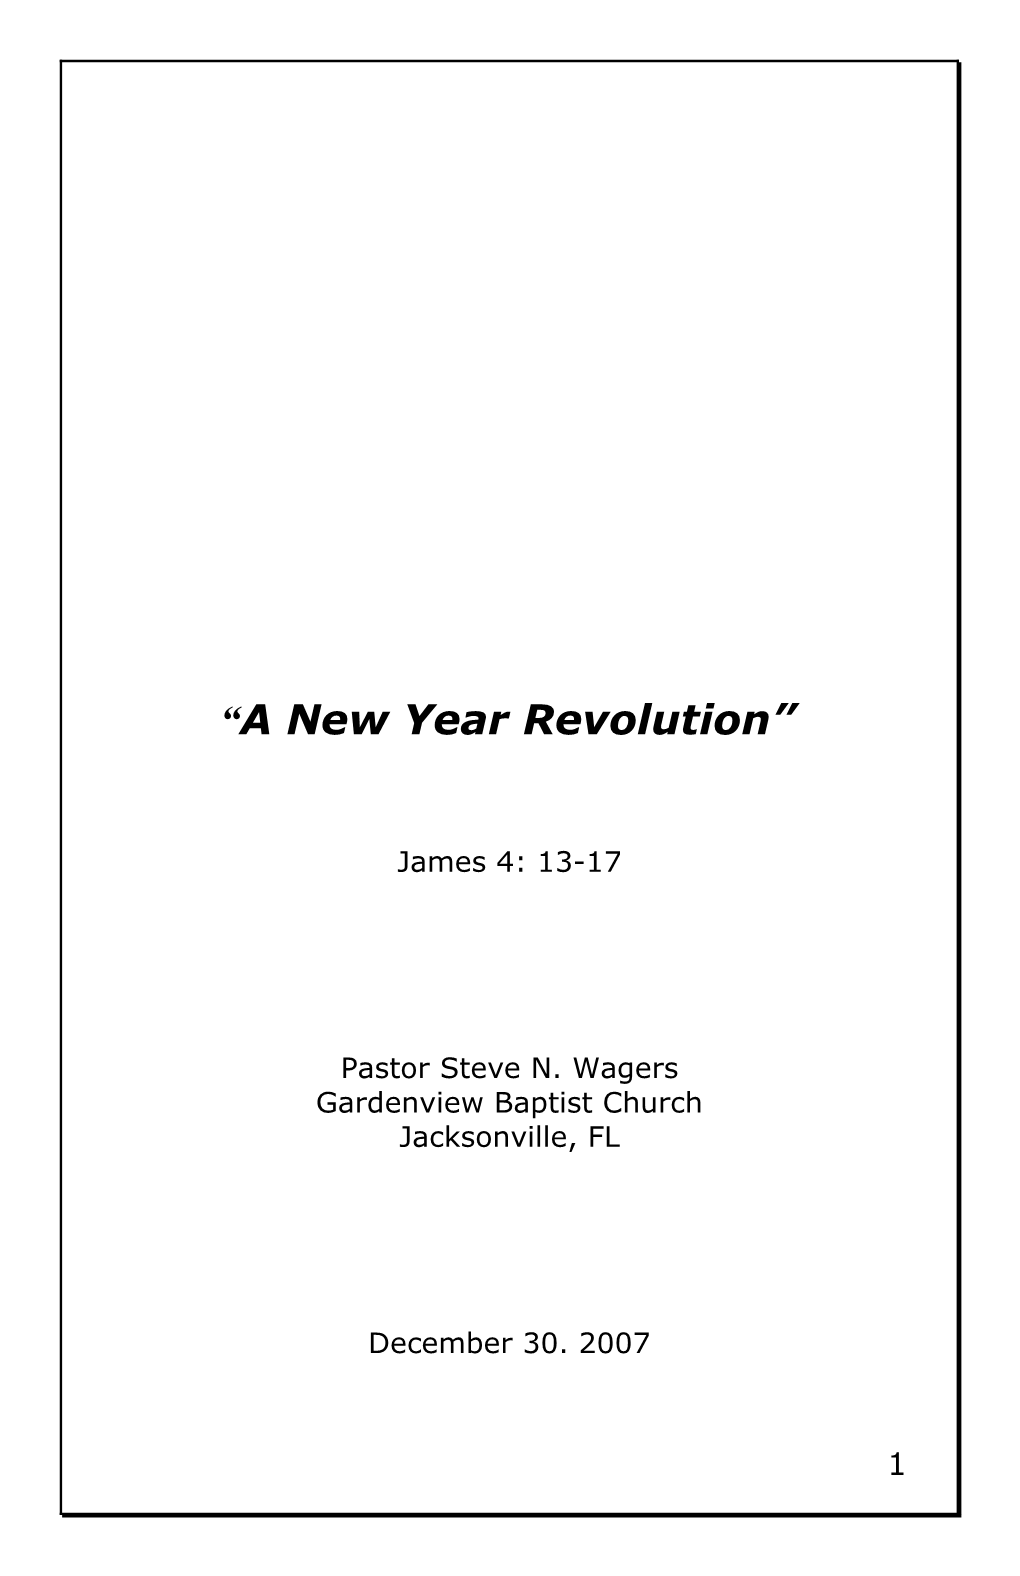 A New Year Revolution